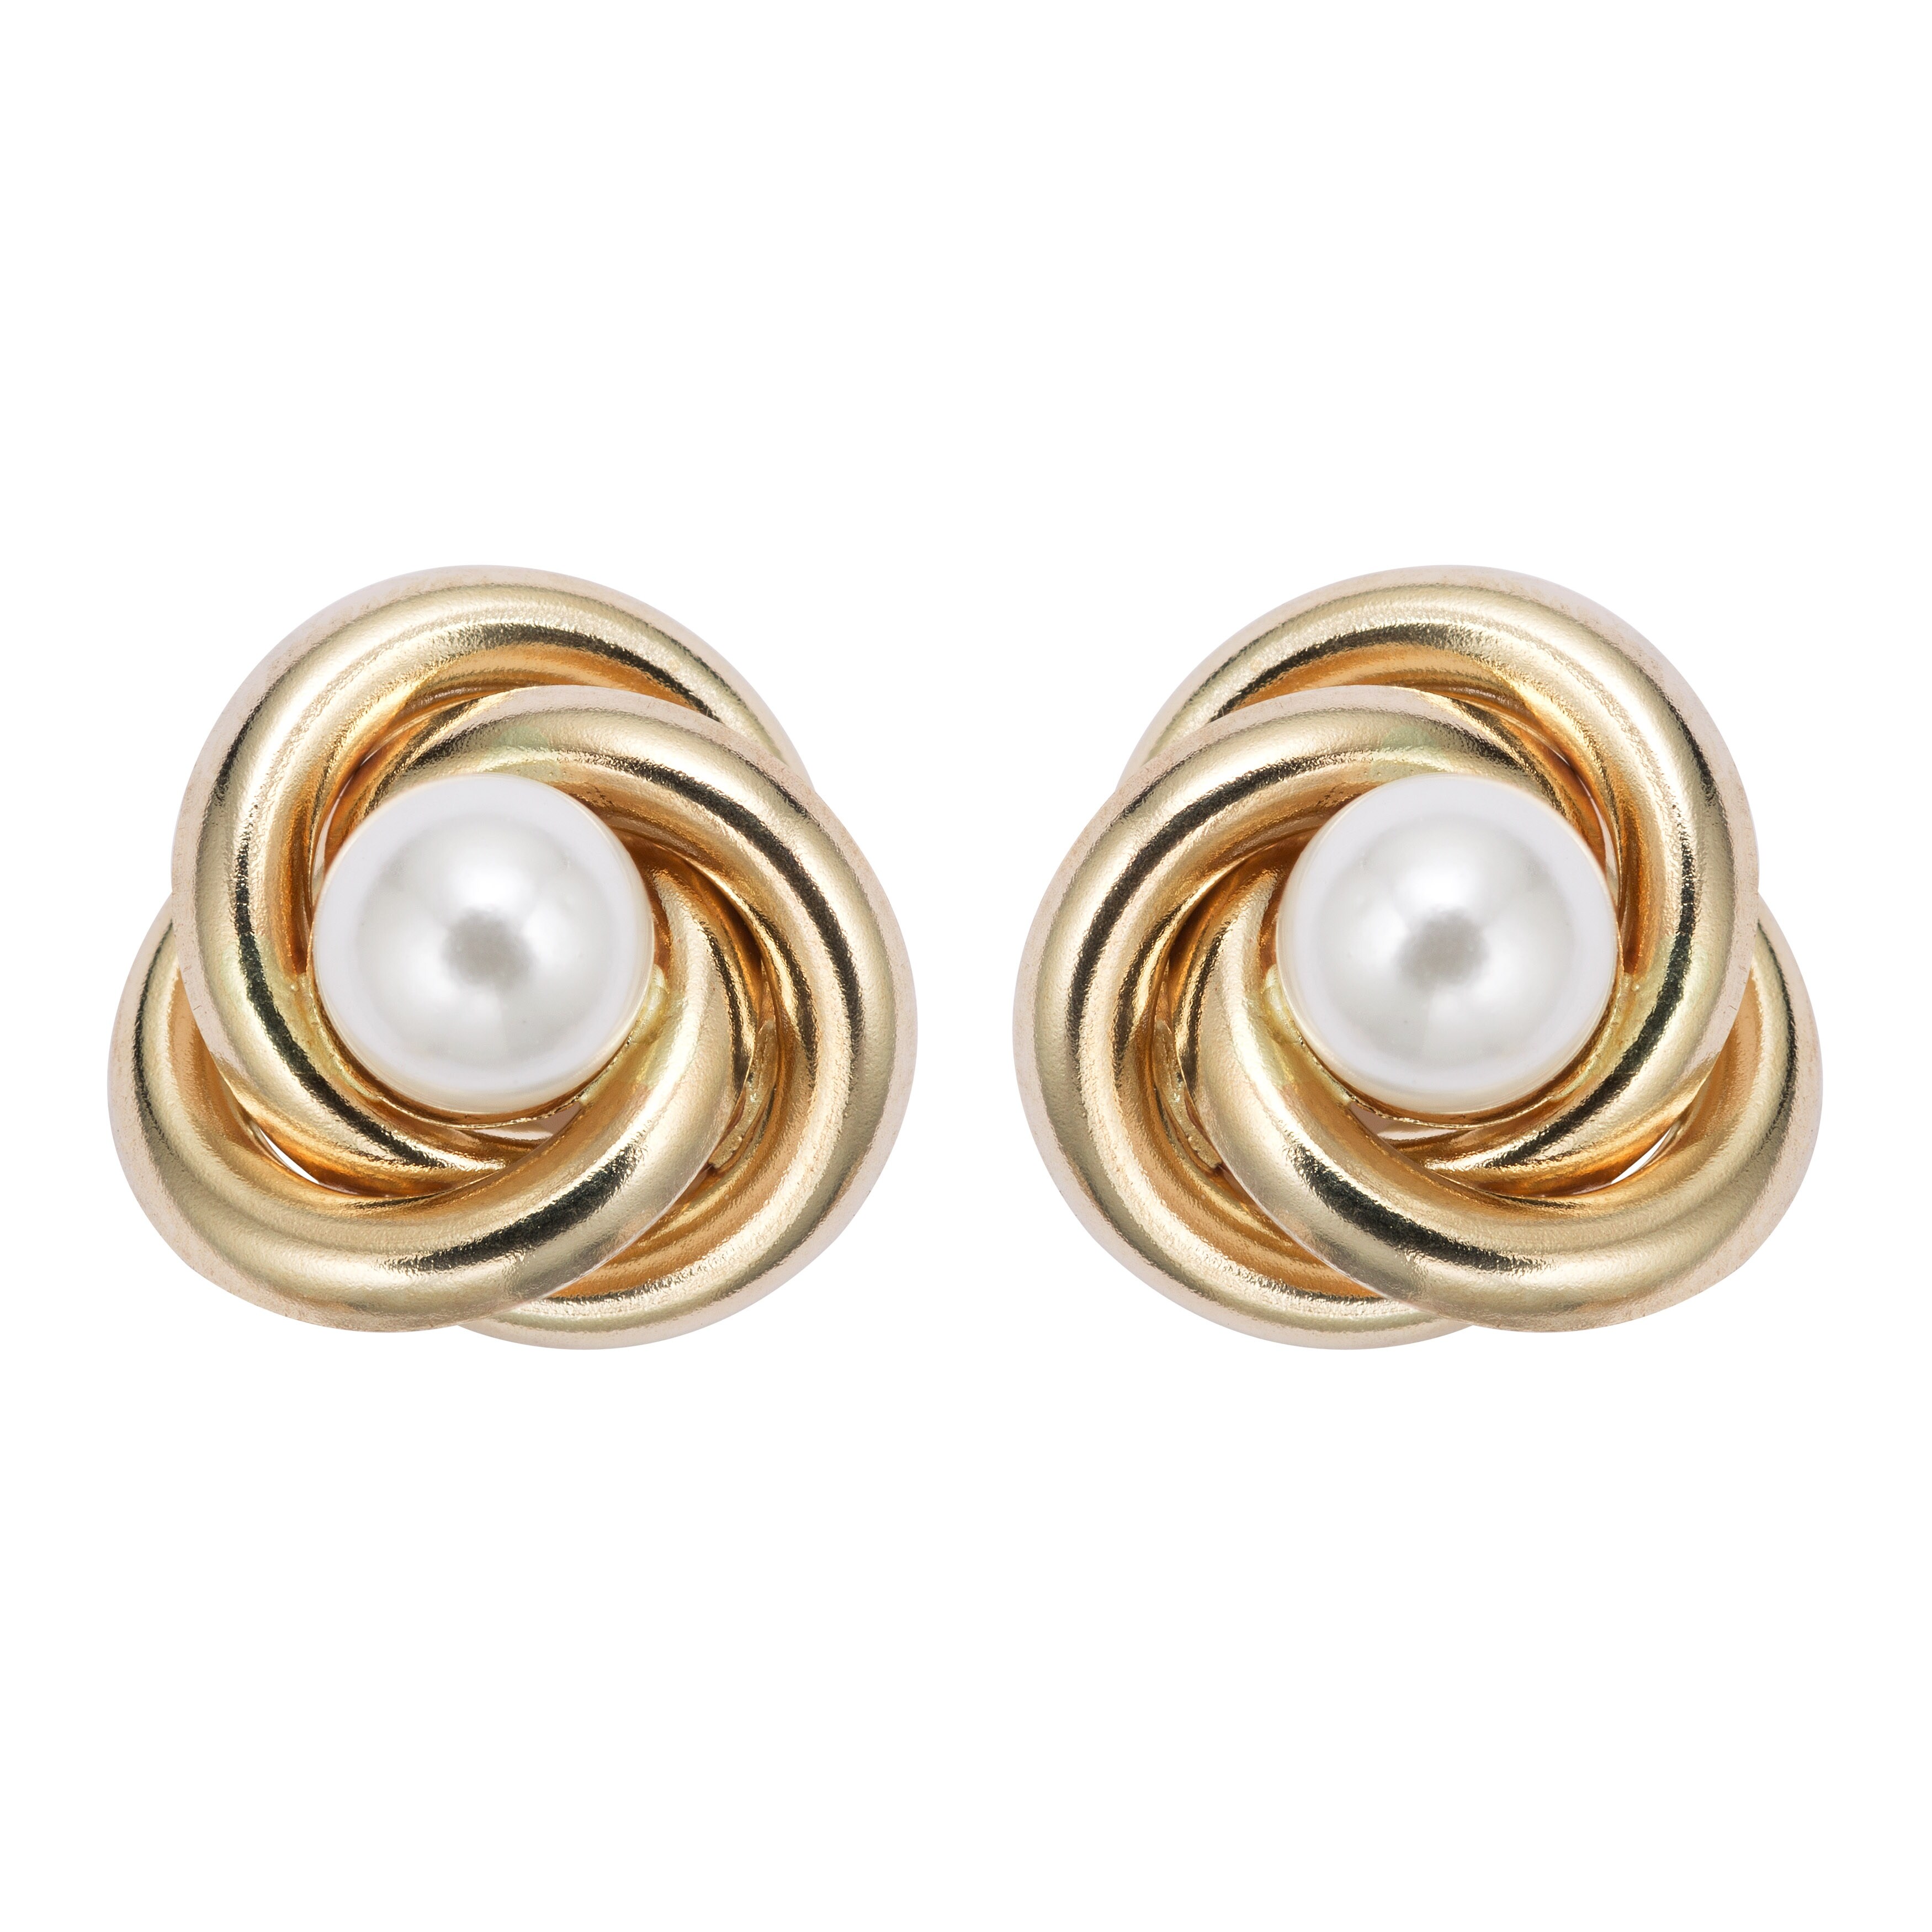 Pearlyta 14k Gold Love Knot Freshwater Pearl Stud Earrings With Gift Box 8mm White Overstock